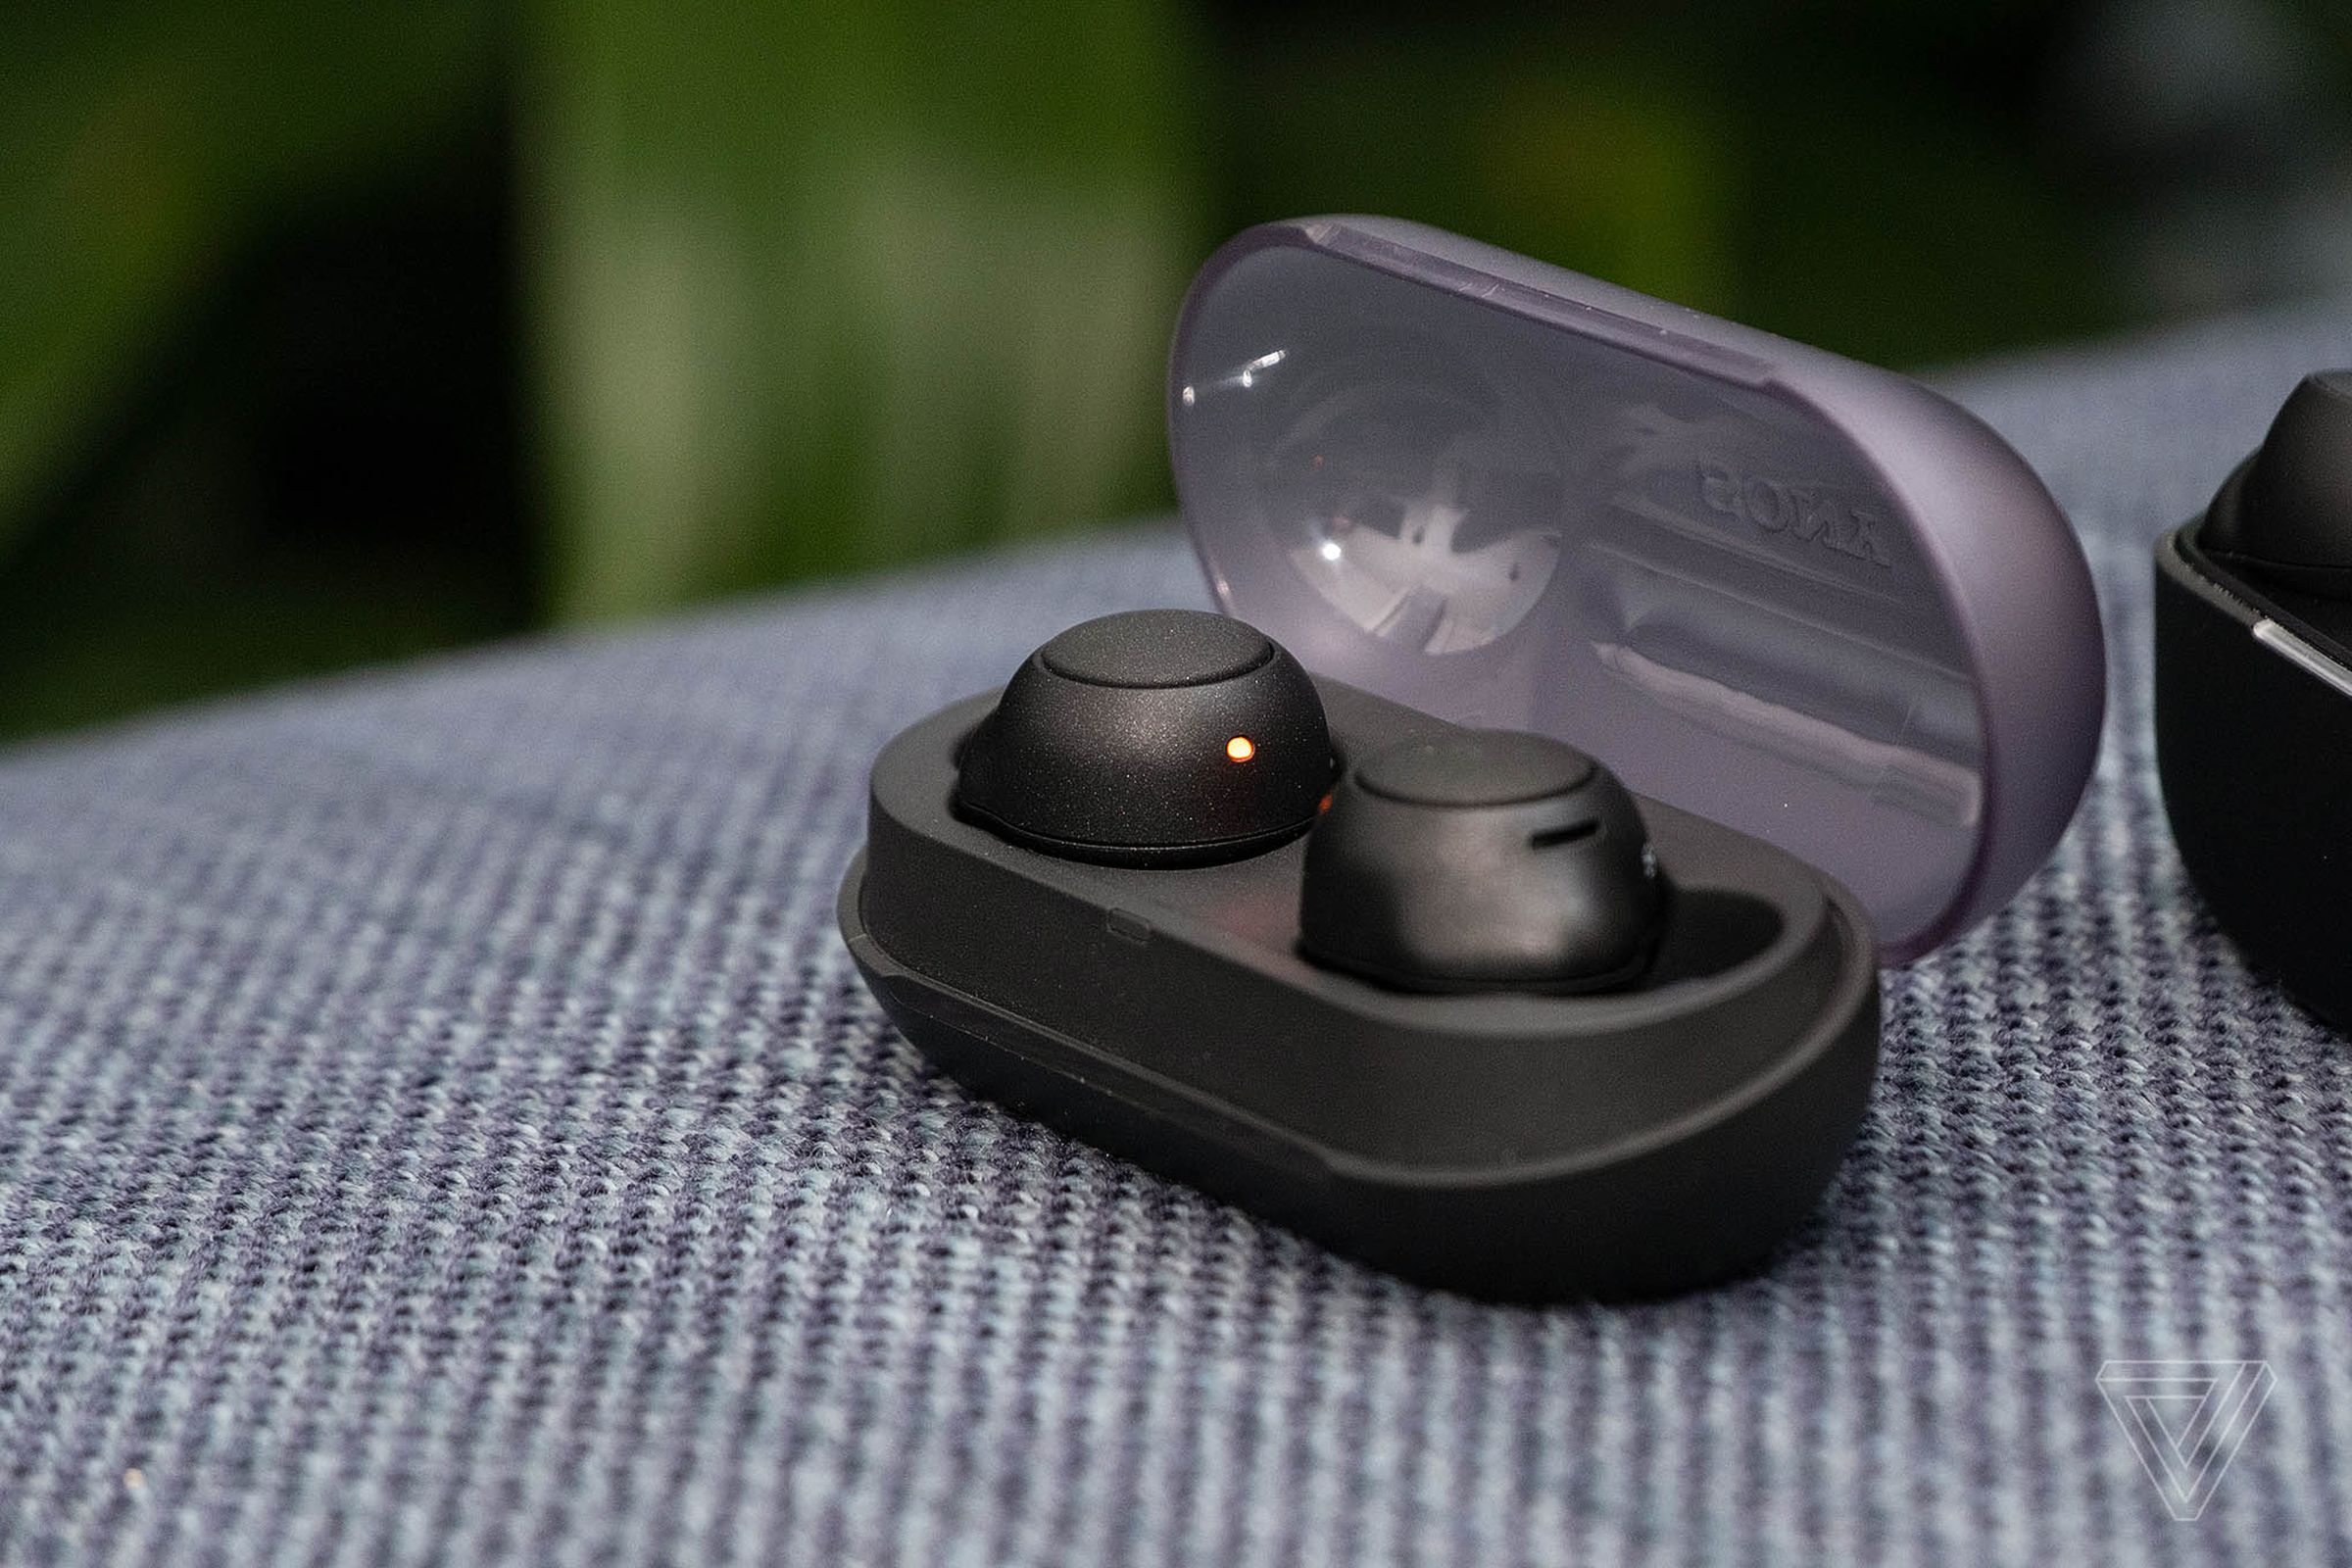 The smoked gray lid allows you to see the charging indicator light. The case itself is super compact, though the tradeoff is that it only carries one extra charge for the buds.